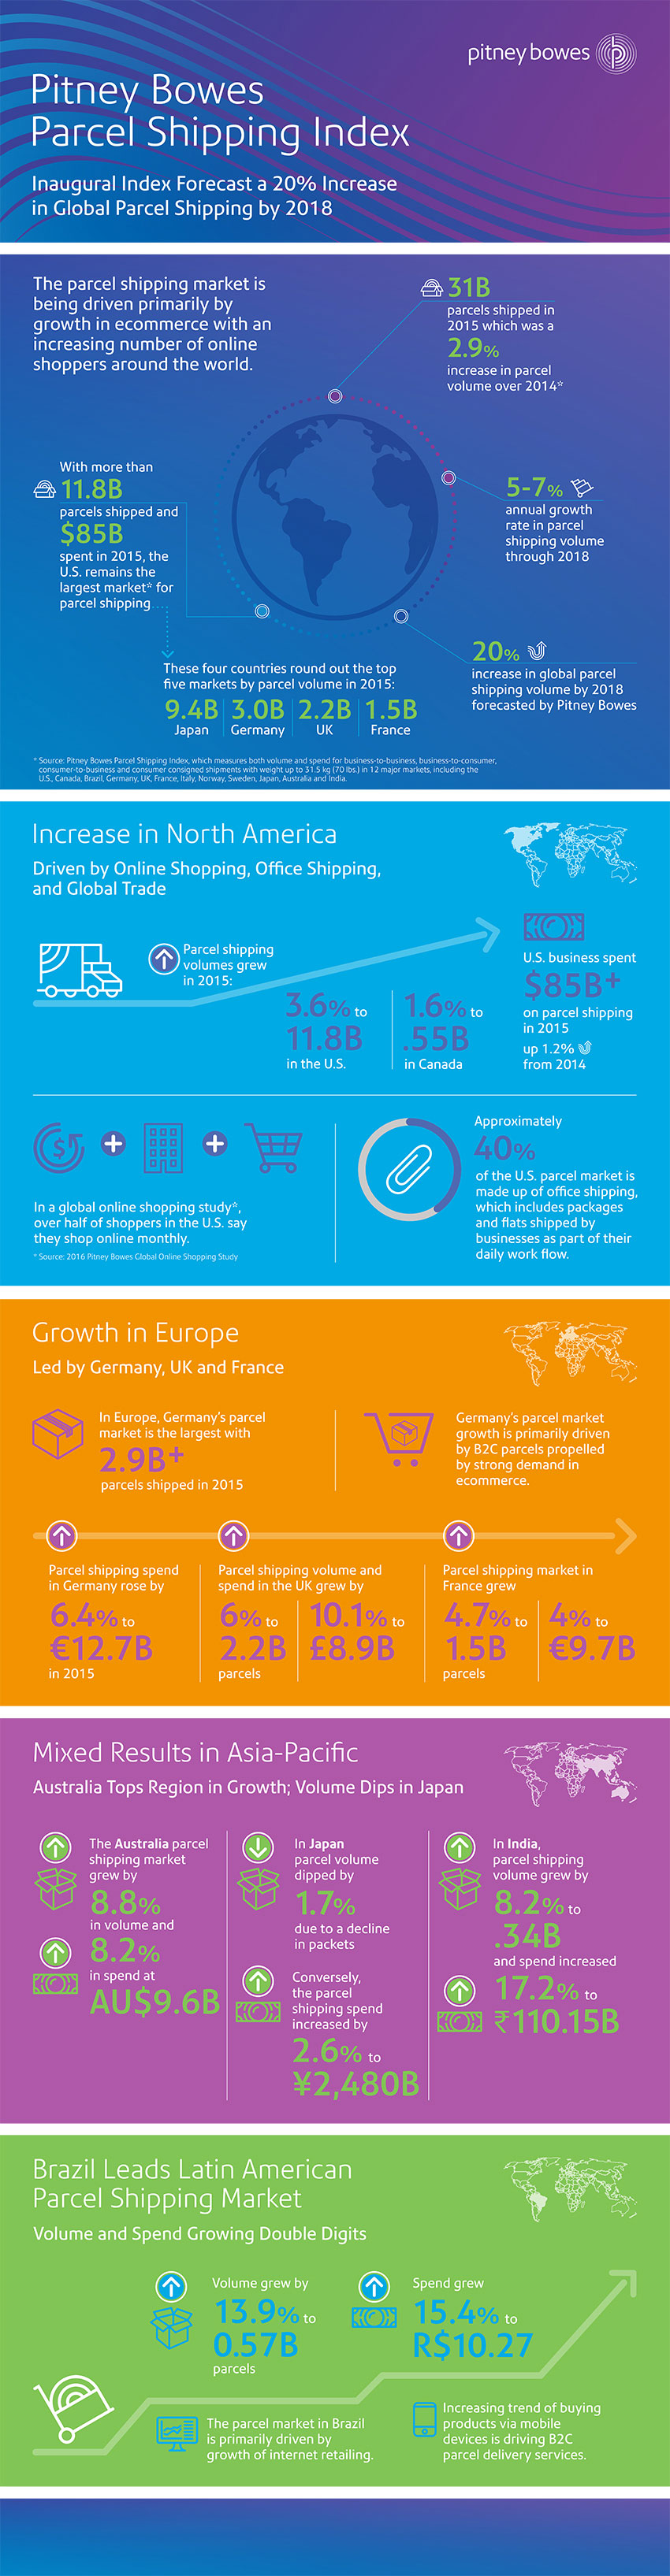 Pitney Bowes Parcel Shipping Index infographic